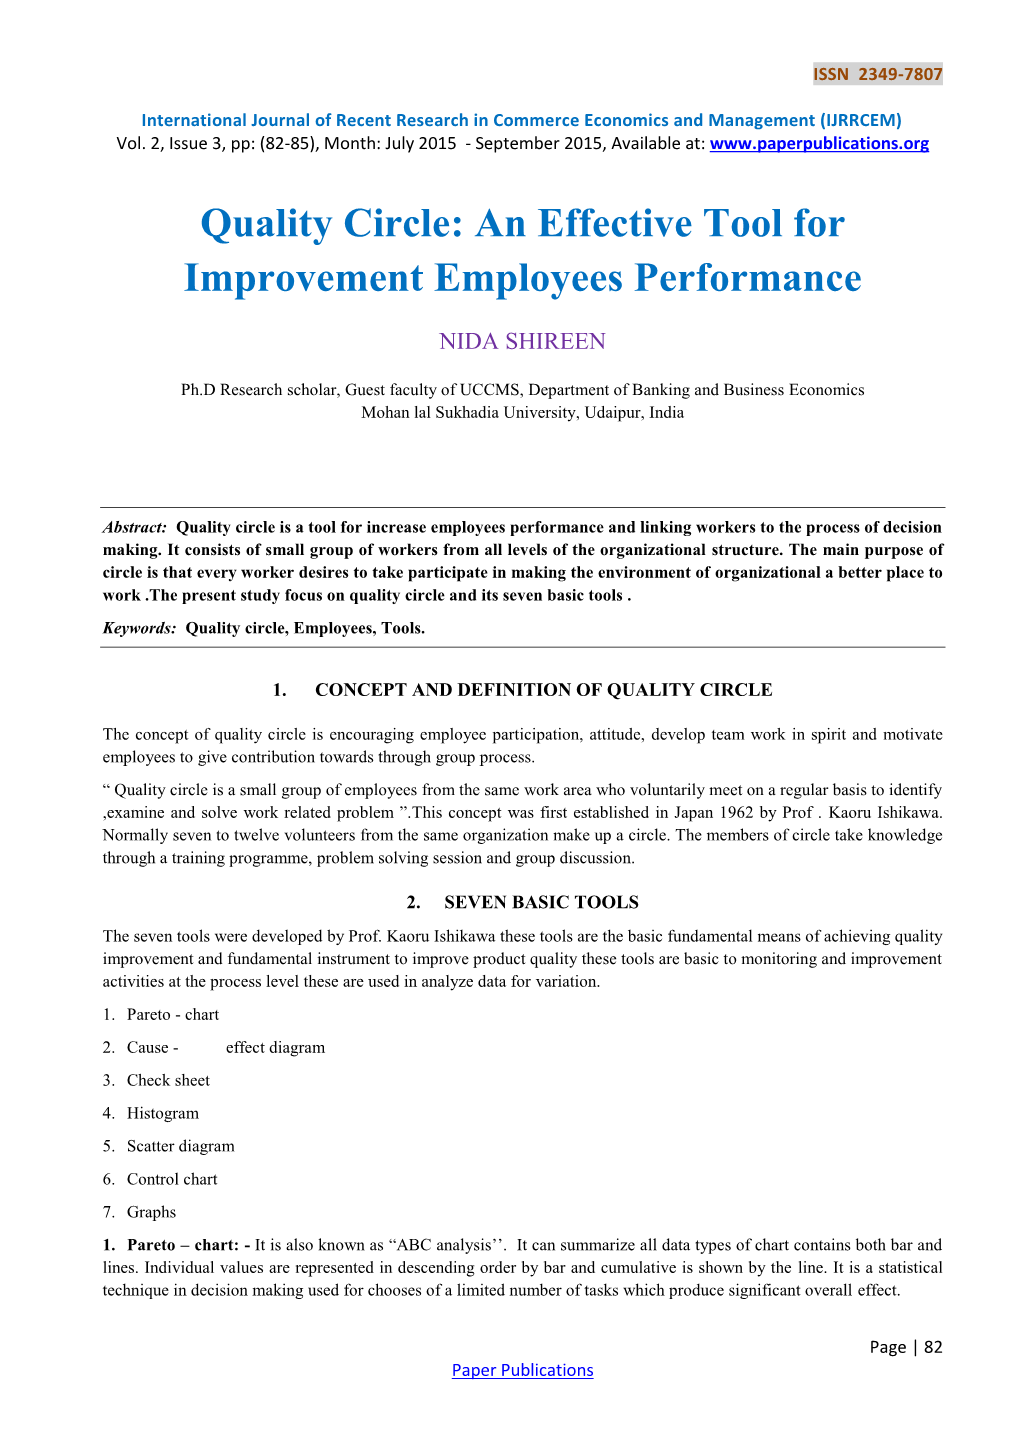 Quality Circle: an Effective Tool for Improvement Employees Performance